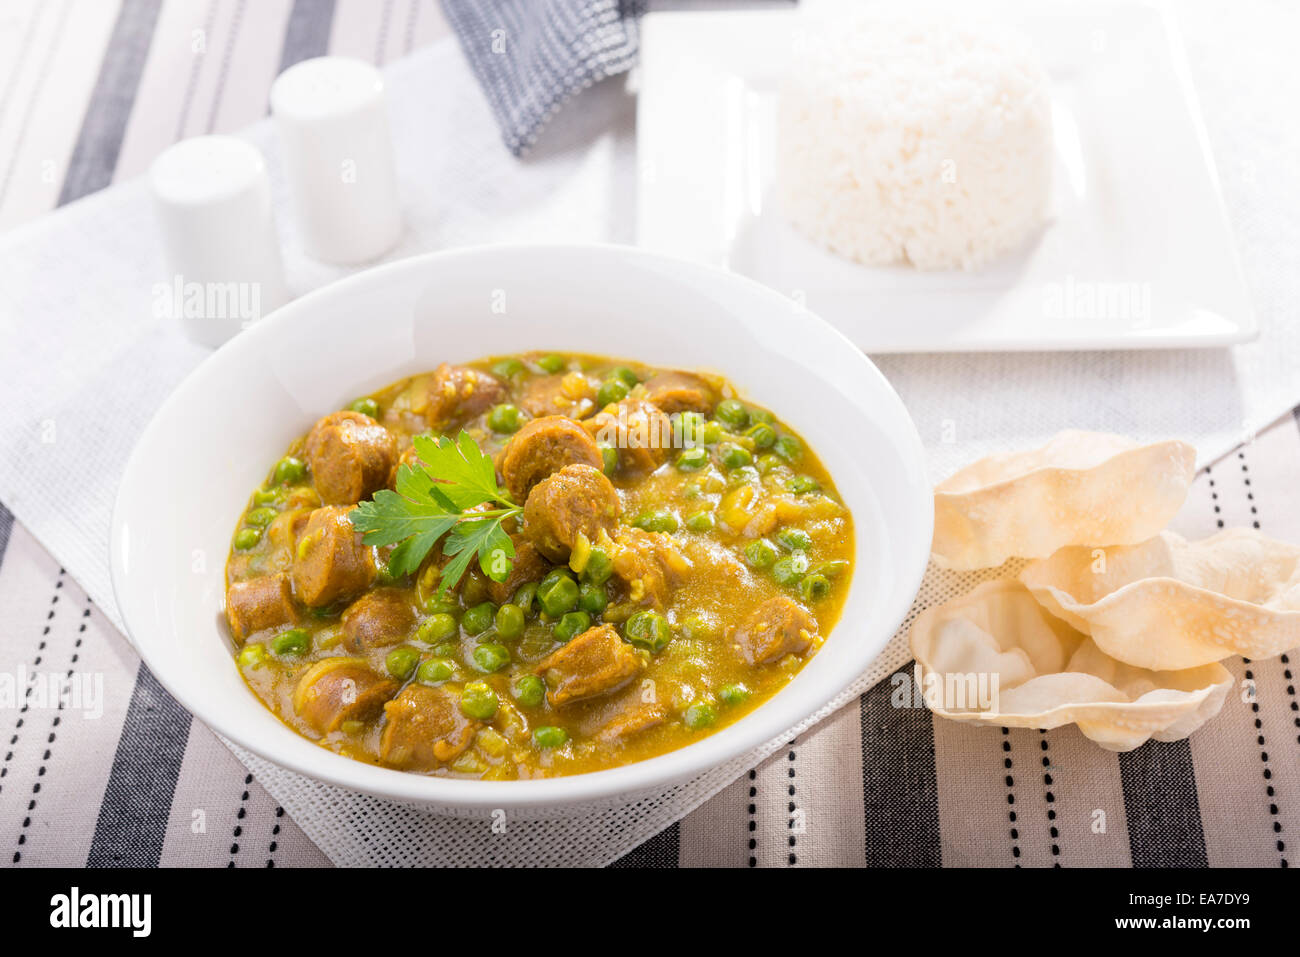 Large bowl of curried sausages with peas and a side of rice and papadum Stock Photo